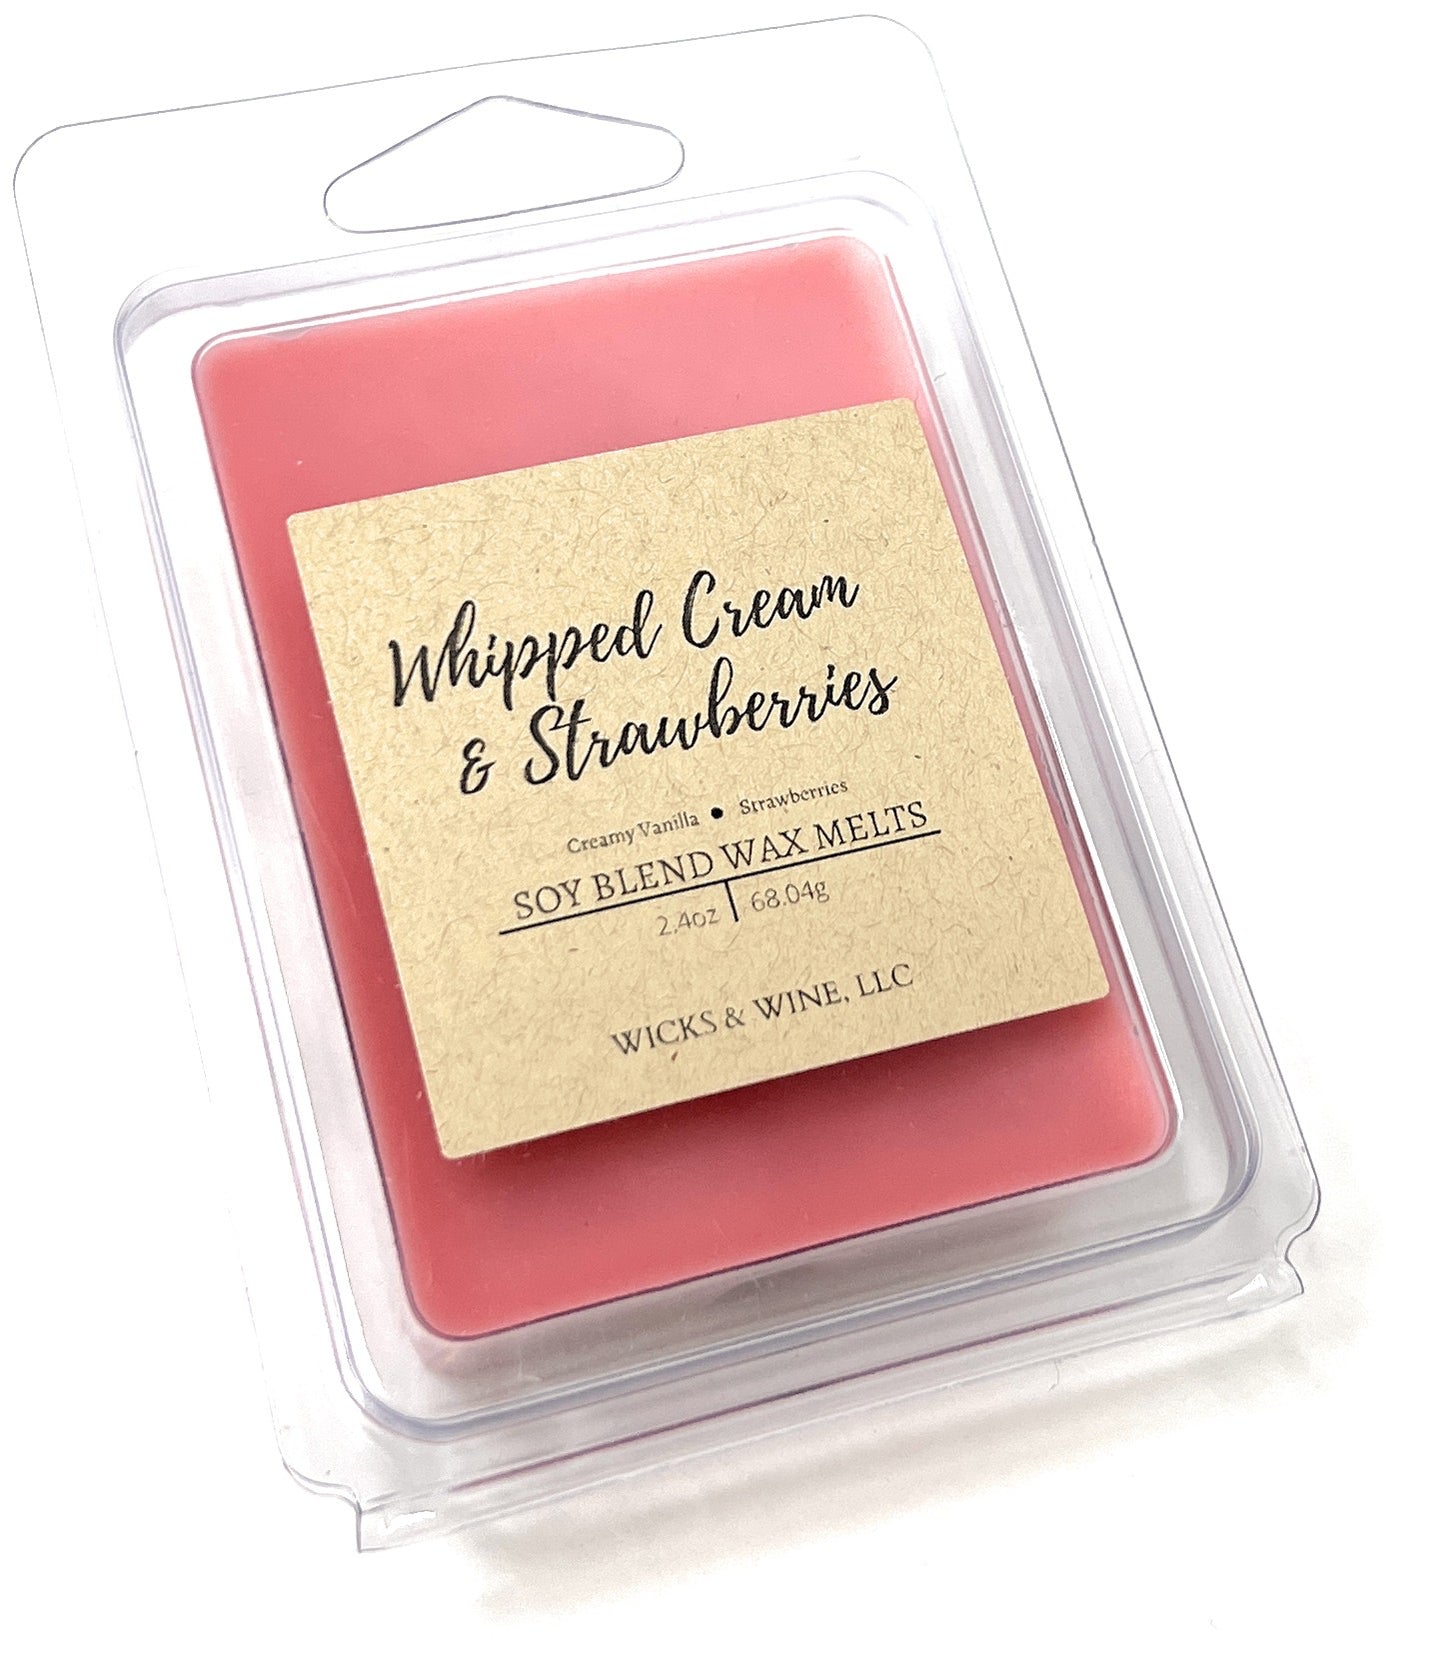 Whipped Cream & Strawberries Wax Melts